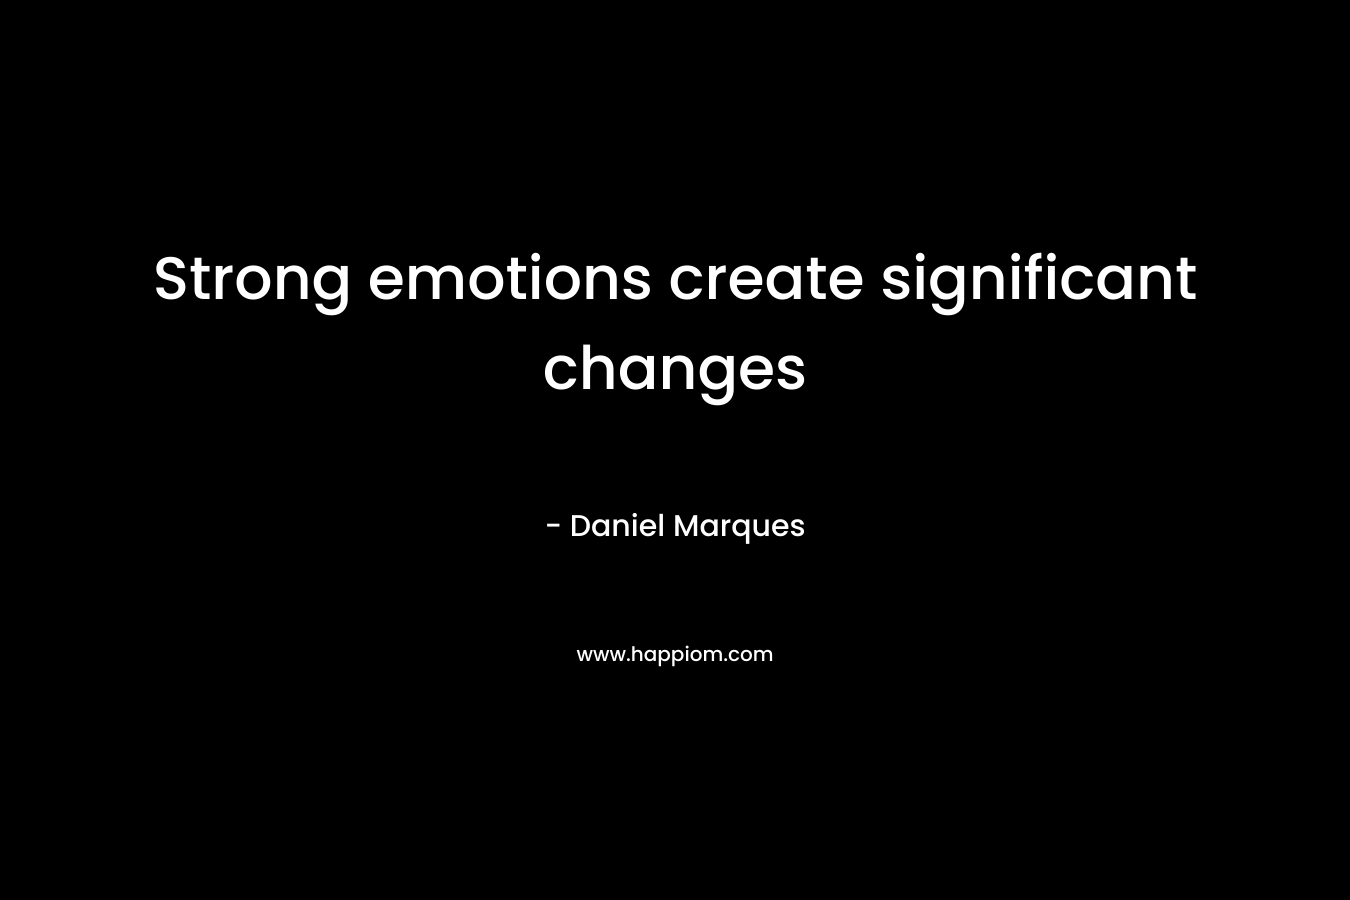 Strong emotions create significant changes